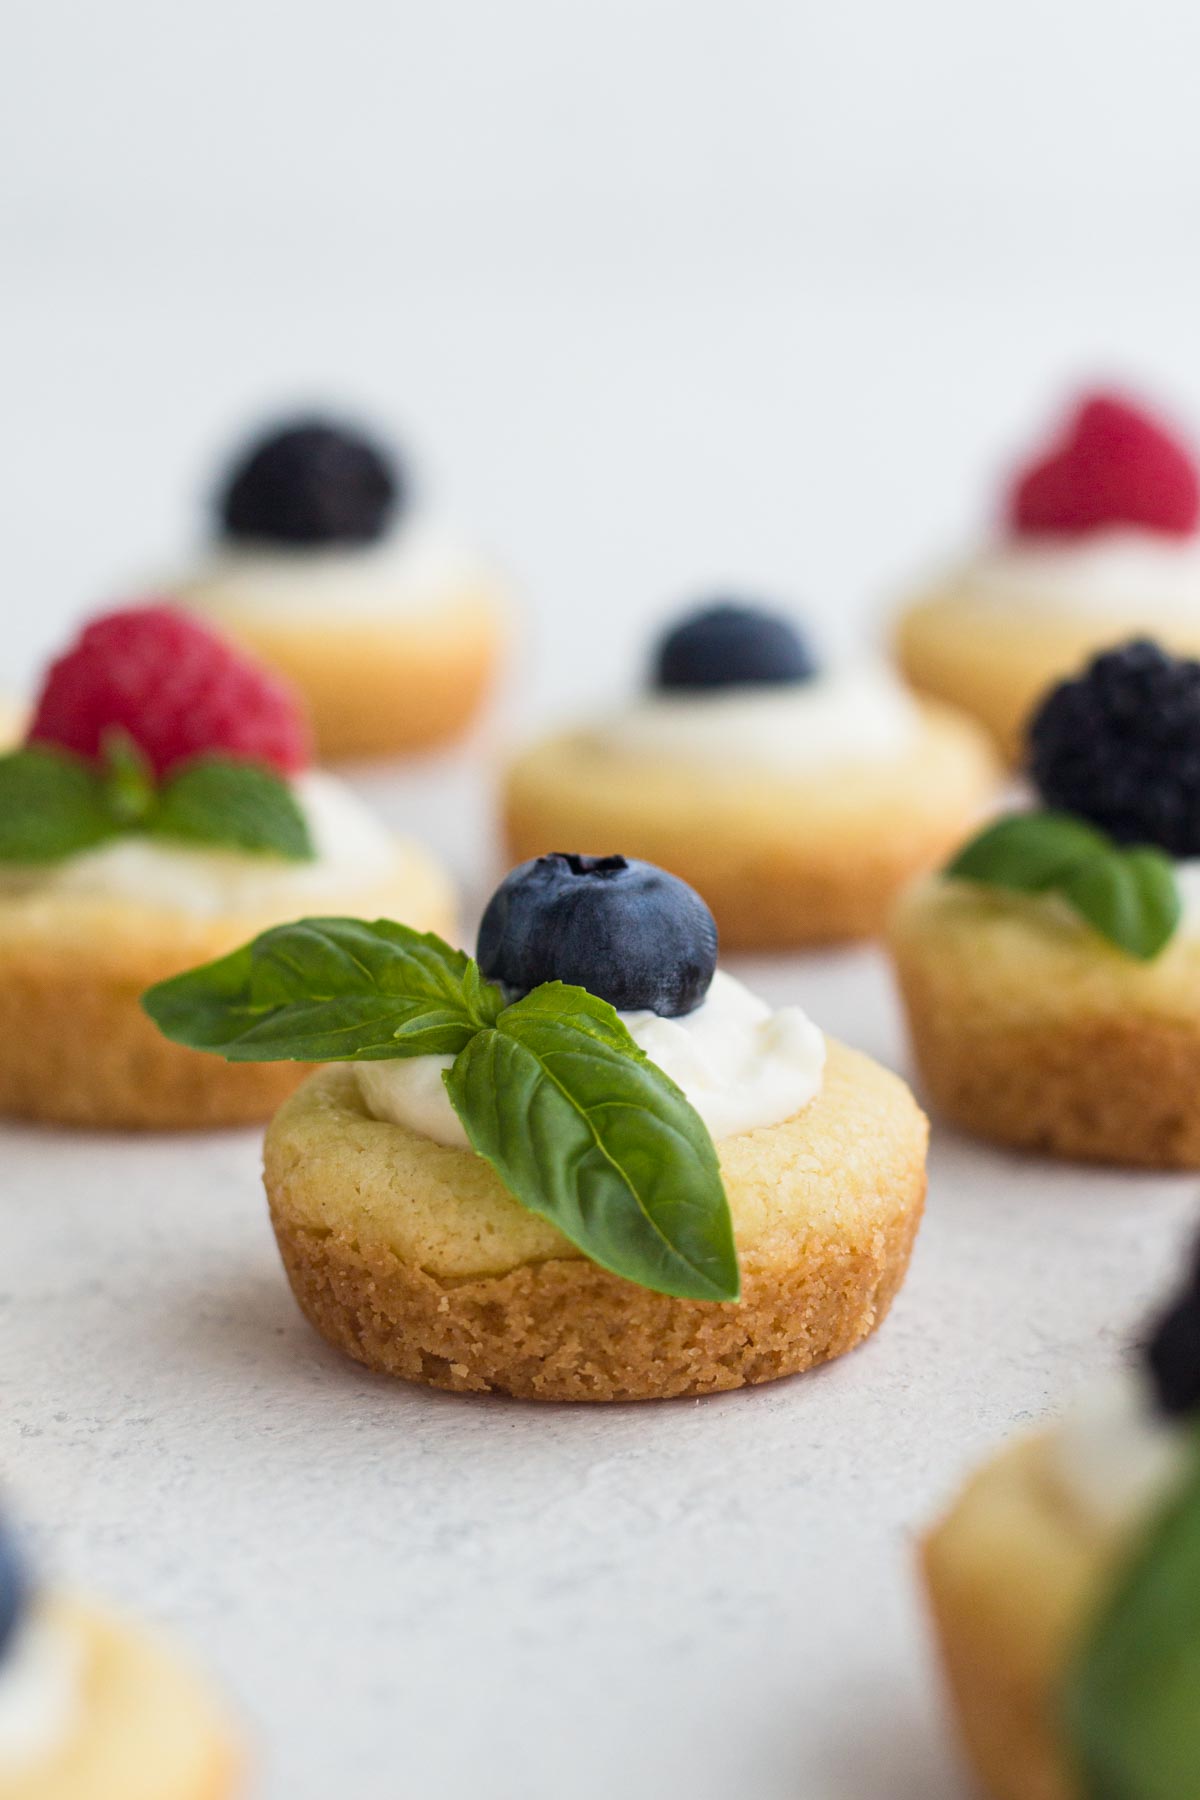 Mini fruit tarts topped with blueberry and a basil sprig on a white surface.